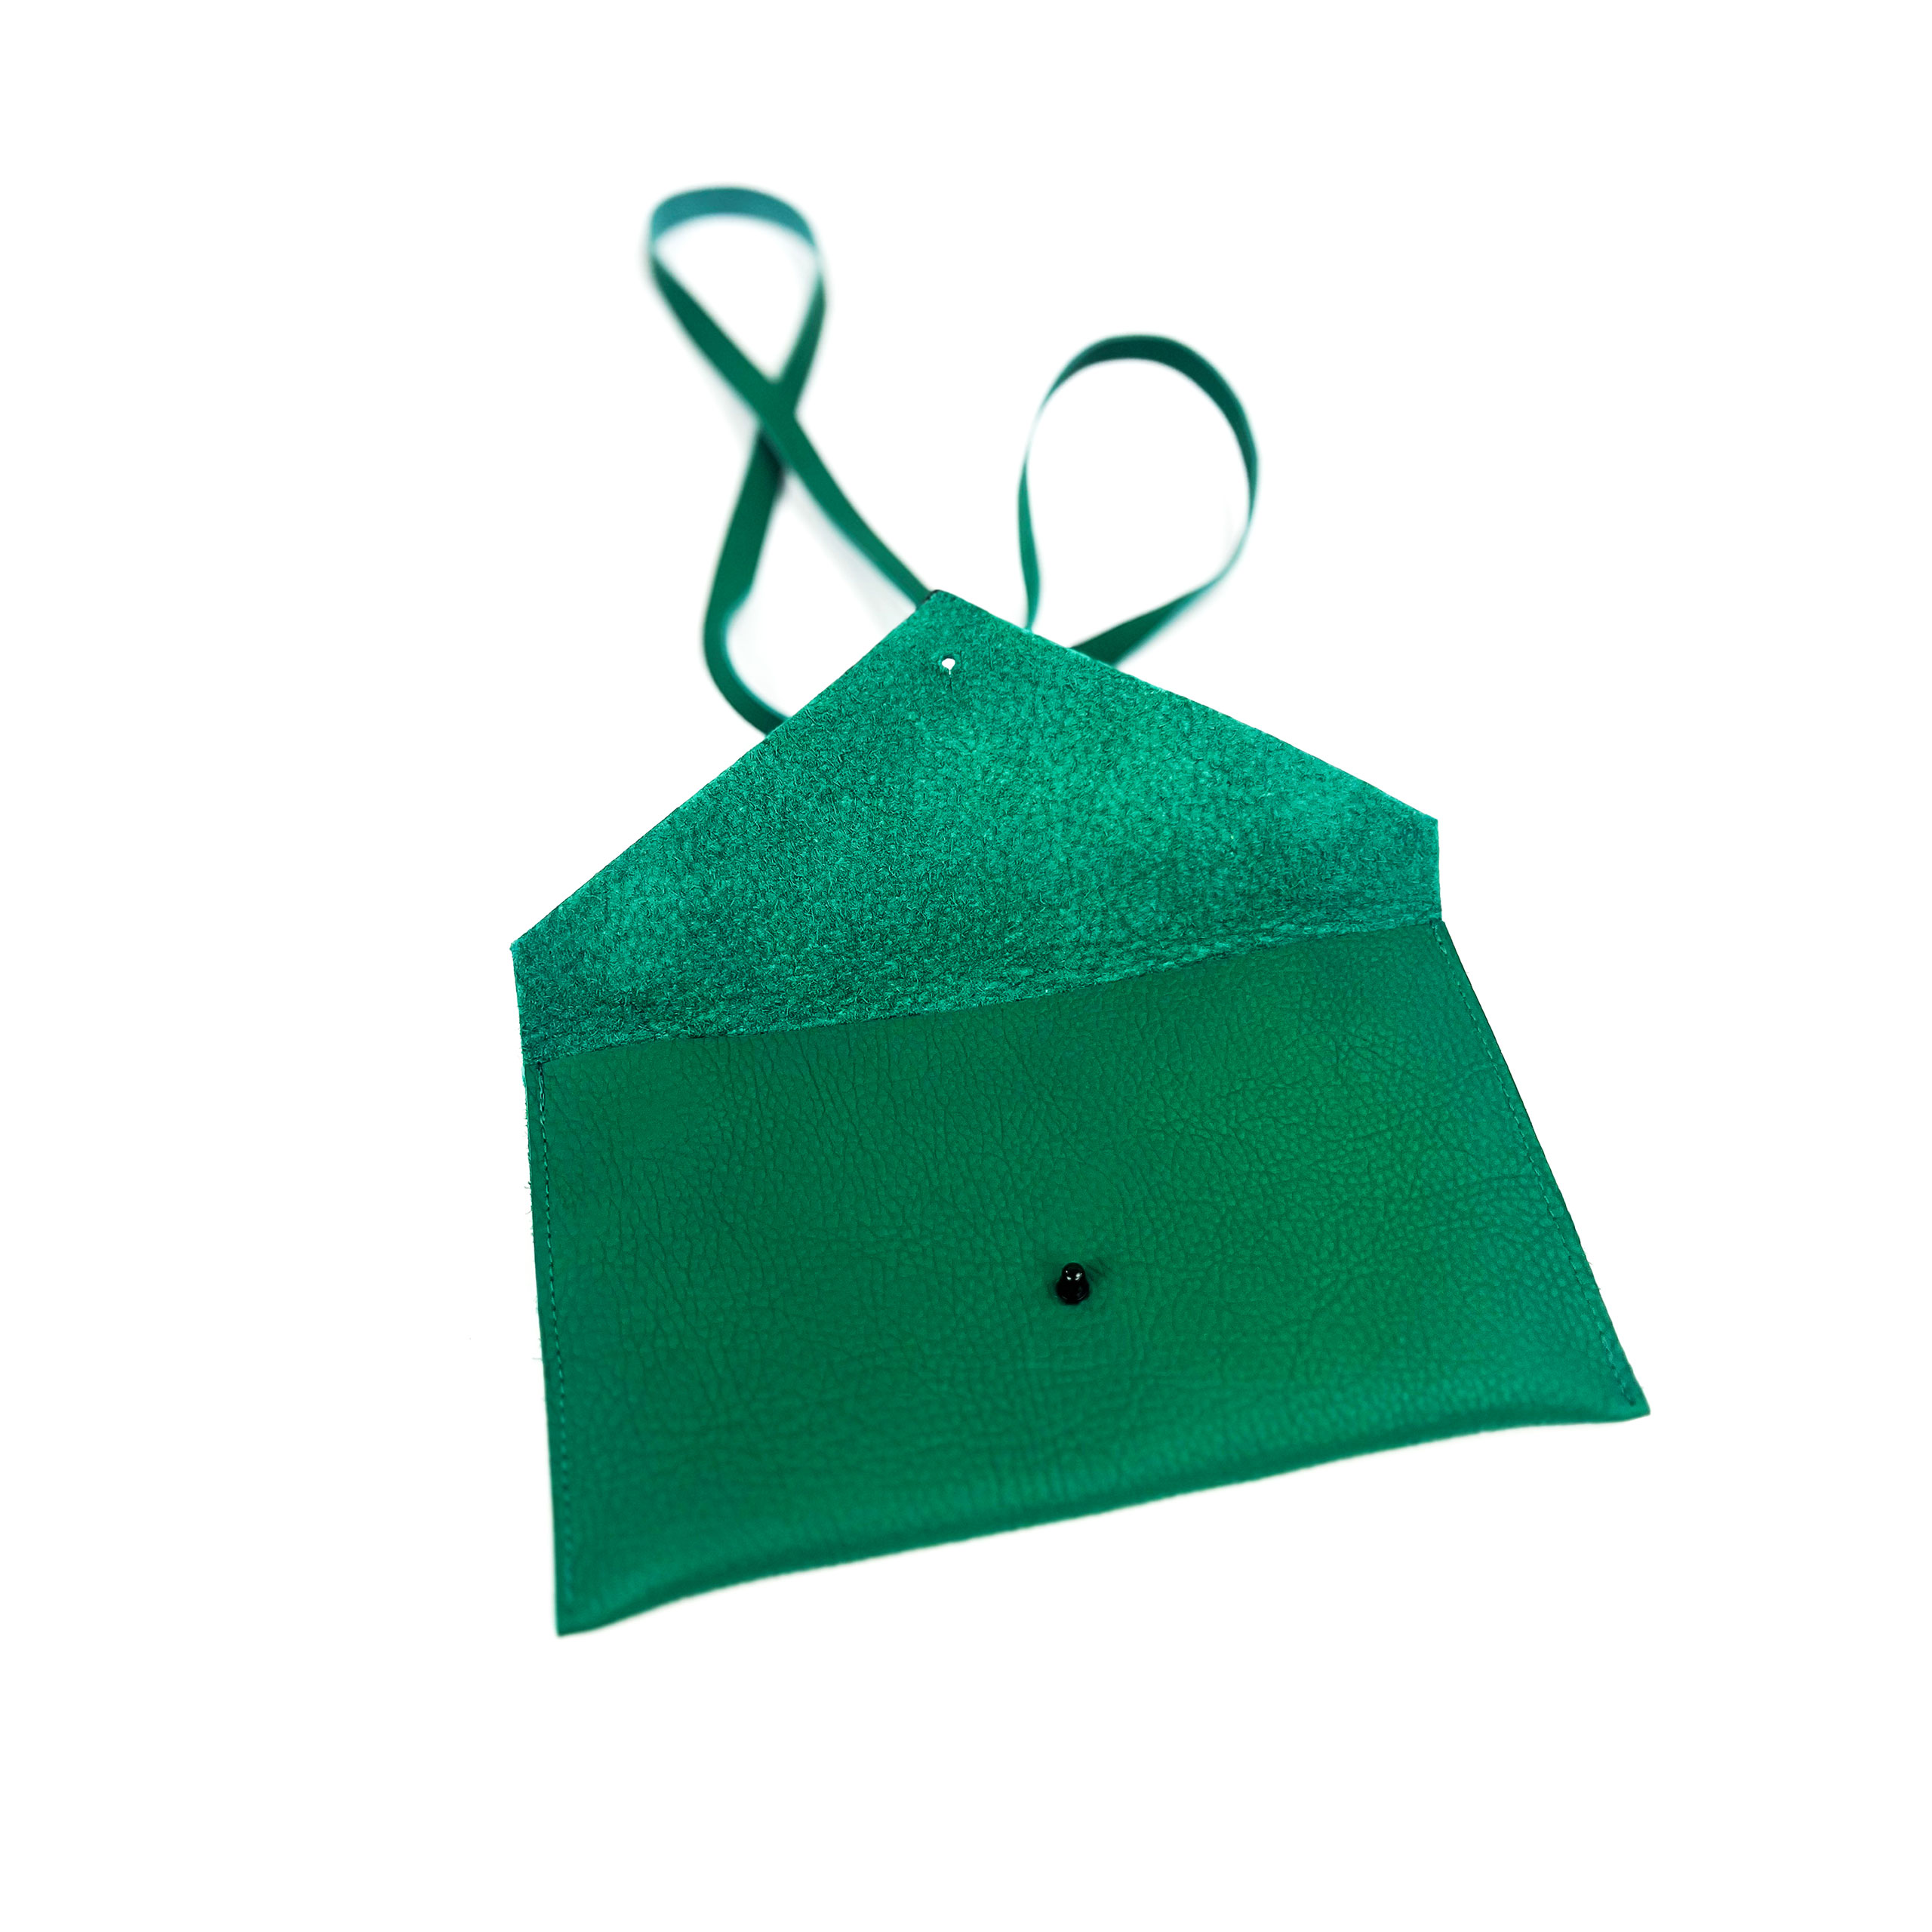 A teal green leather shoulder purse with open top, isolated on a white background.